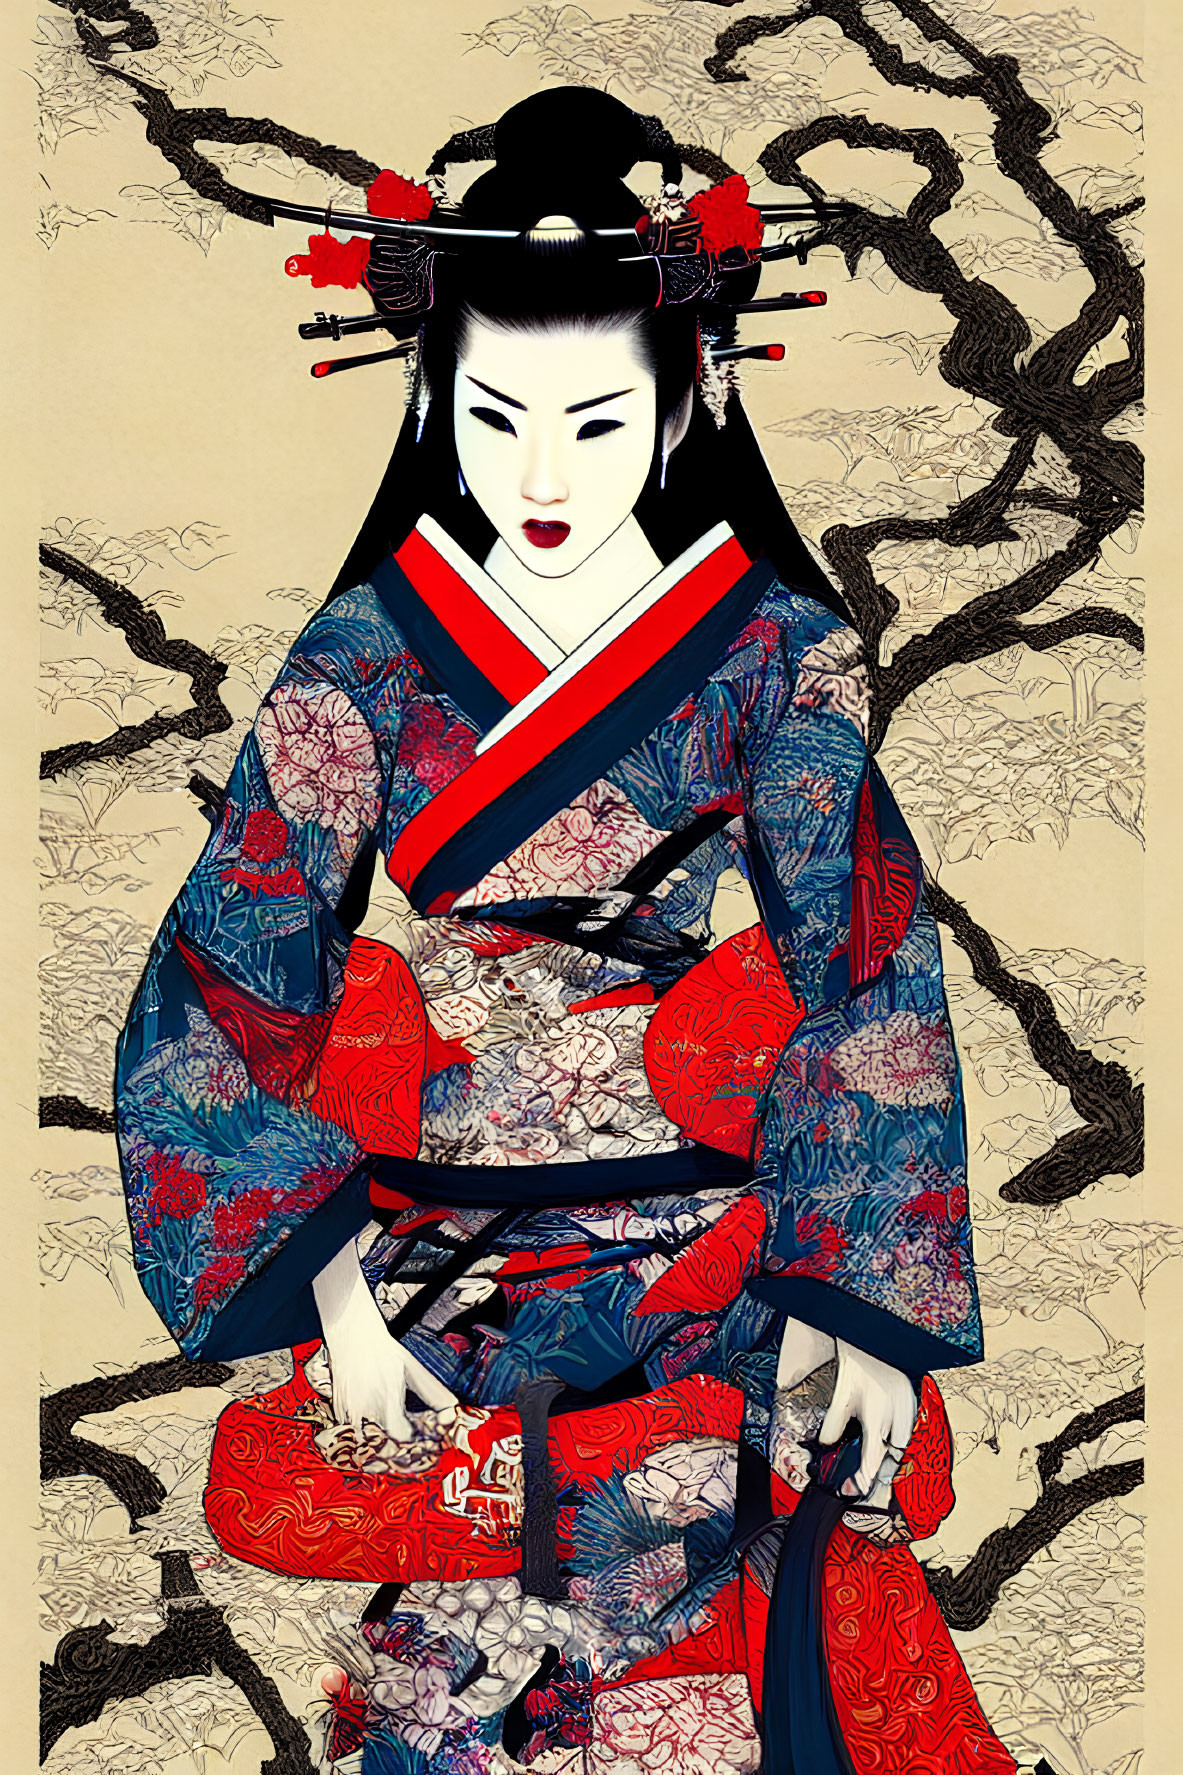 Geisha in traditional kimono with intricate patterns against stylized tree branches